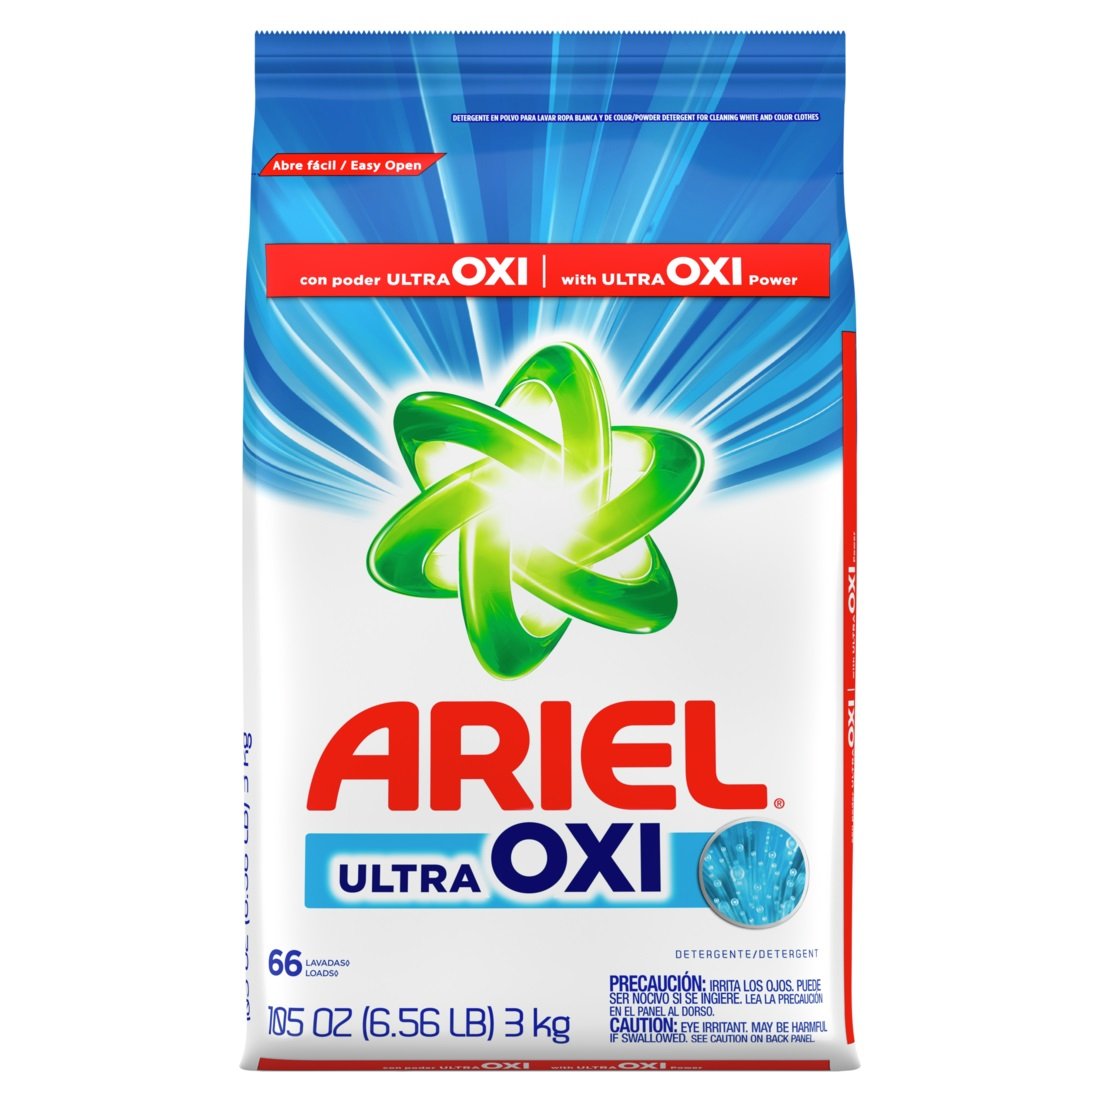 Powder Laundry Detergent with Ultra Oxi, 105oz, 66 loads - Case of 6